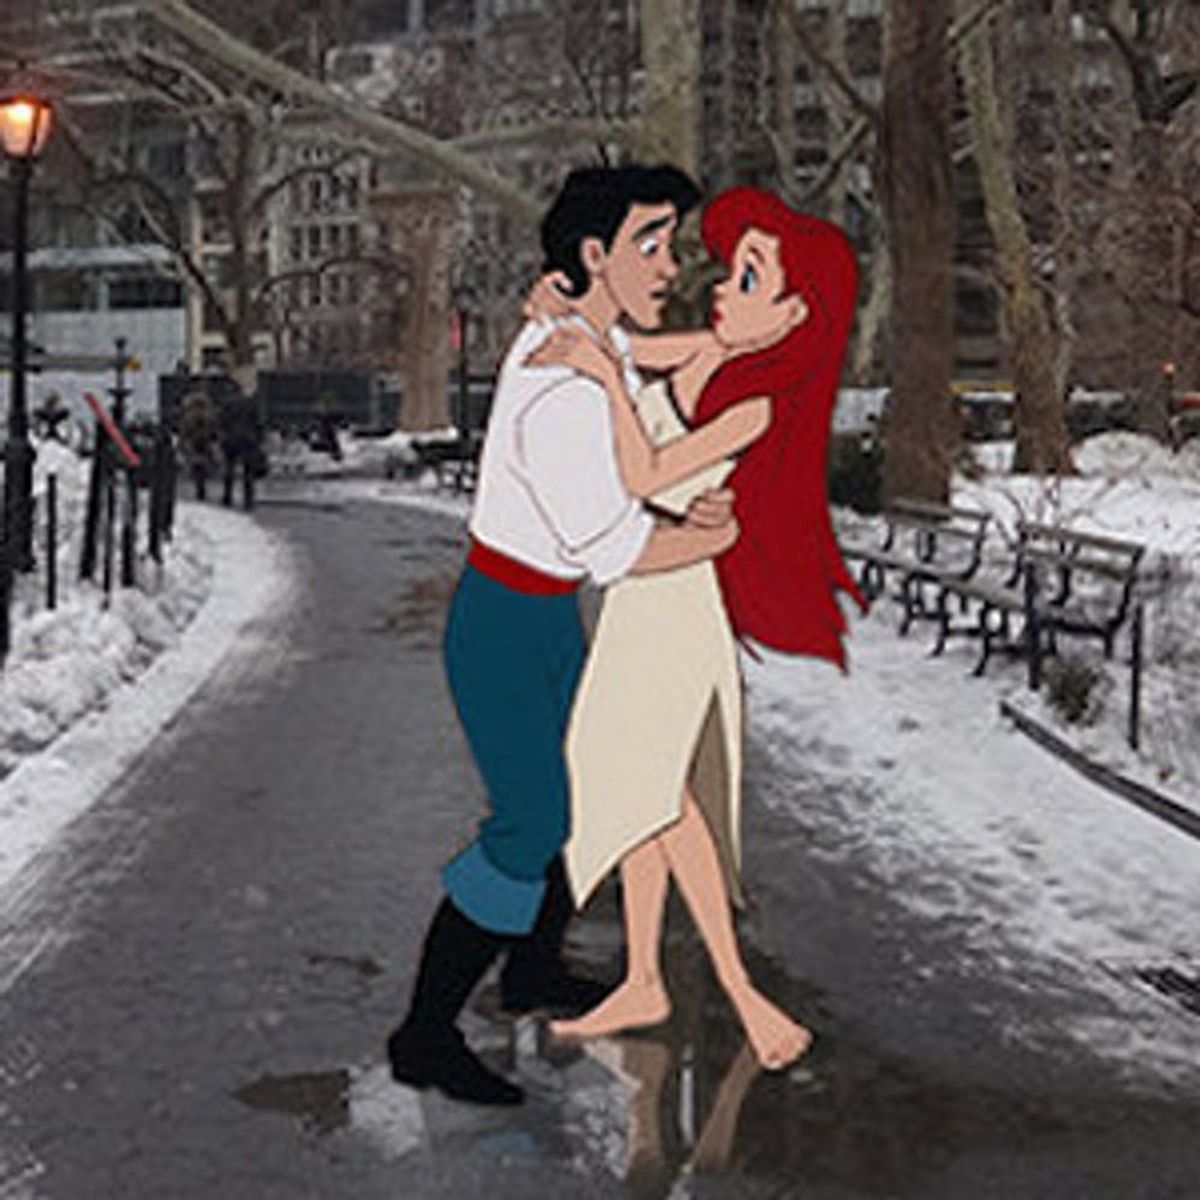 What It Would Look like if Disney Characters Were “Humans of New York”